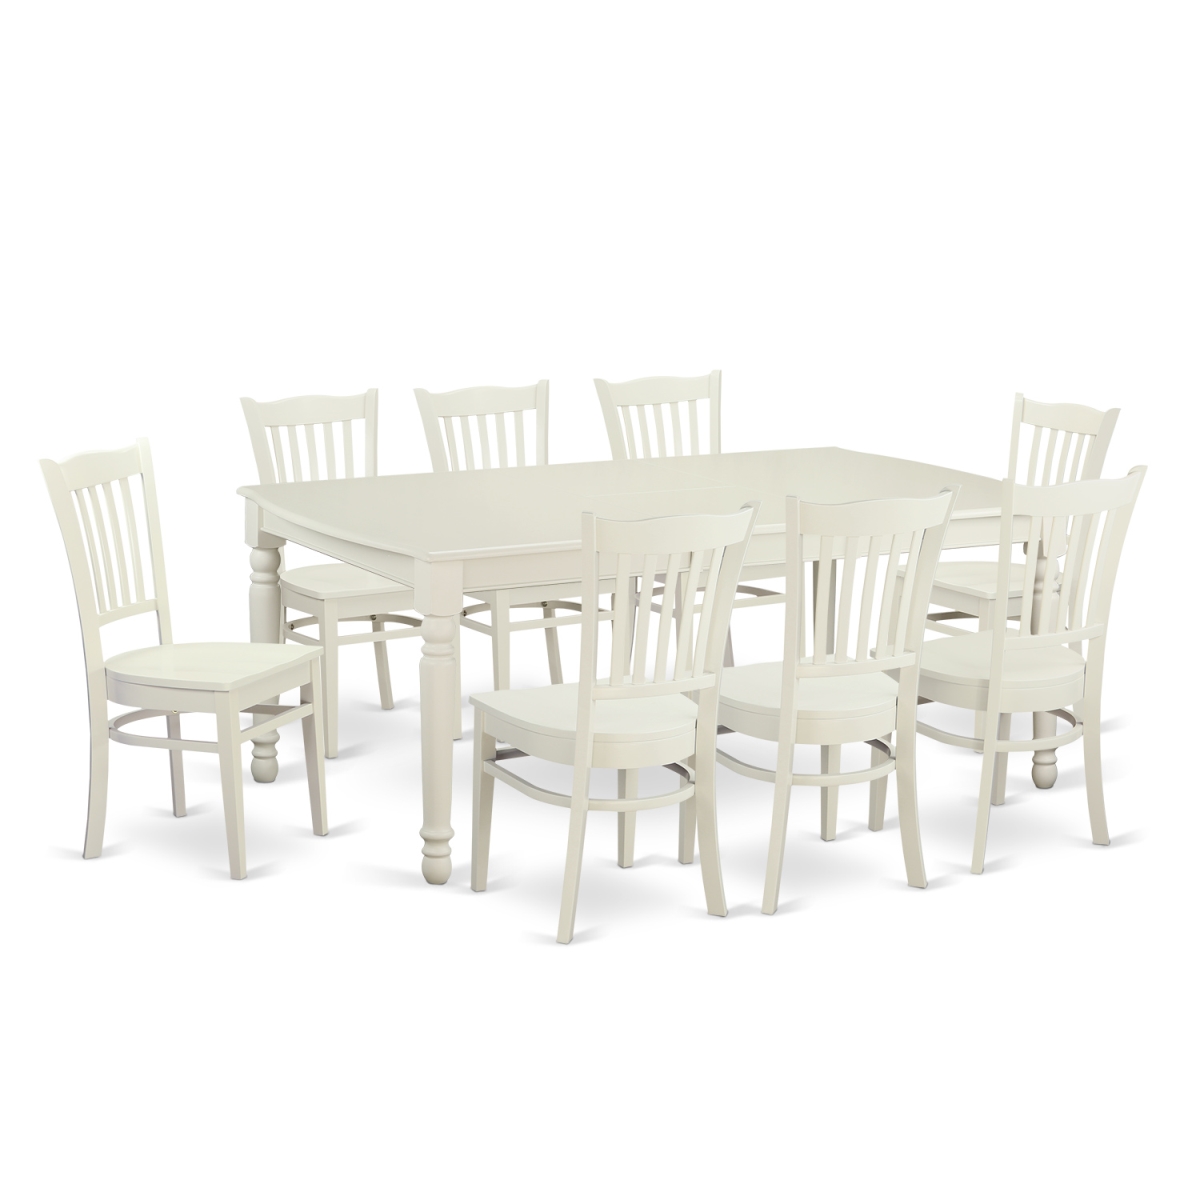 Picture of East West Furniture DOGR9-LWH-W Kitchen Nook Dining Set with 8 Dining Room Table & 8 Chairs, Linen White - 9 Piece